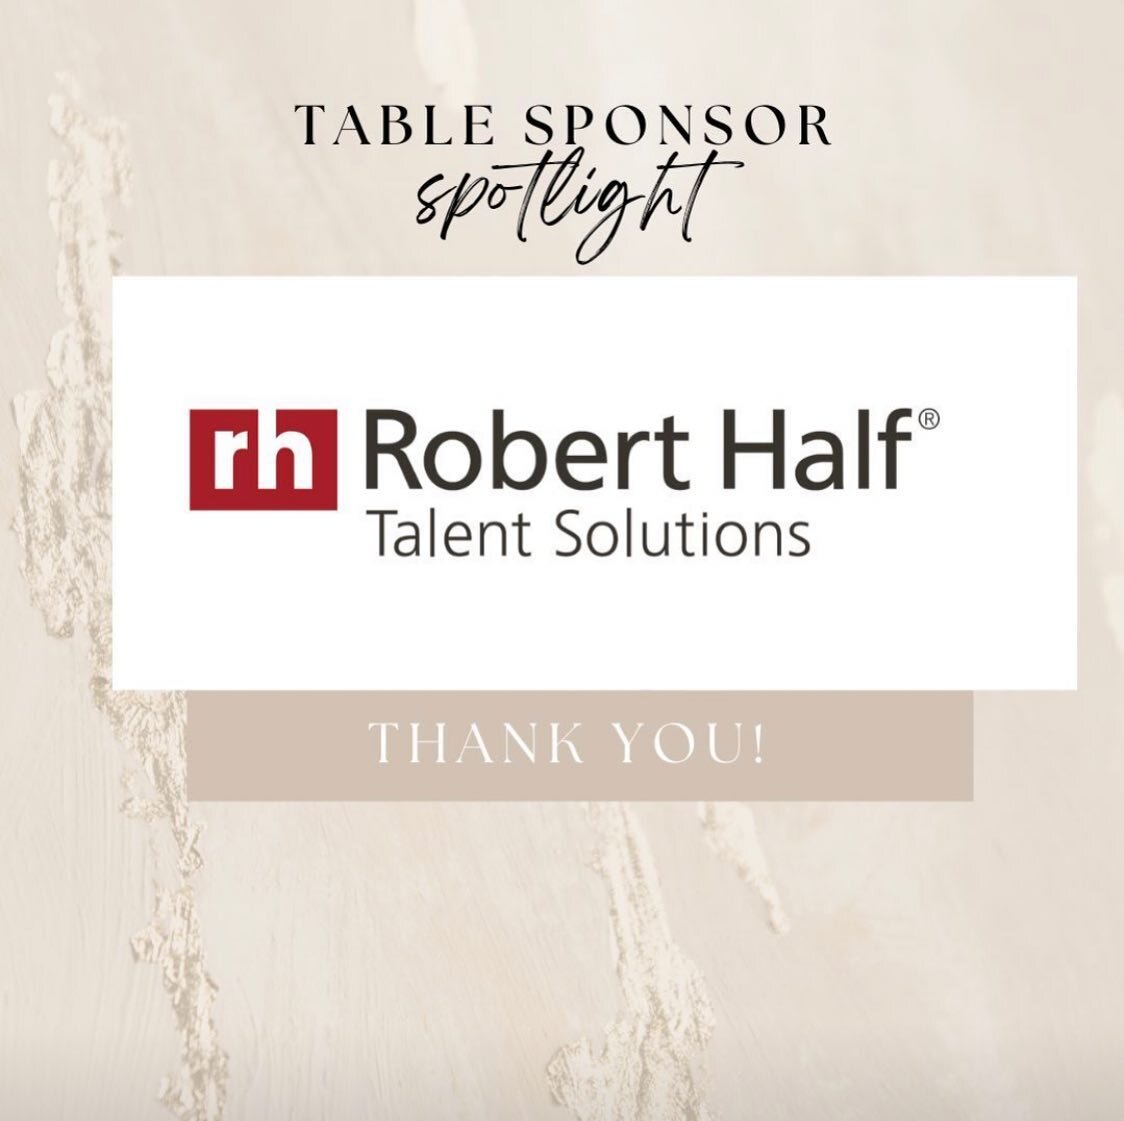 In addition to being our 2023-2024 chapter sponsor, @roberthalf has graciously donated table sponsorship - waiving the registration fees for 5 spots to this Thursday's Women Leaders Roundtable event at Creston Brewing! If you're interested in snaggin